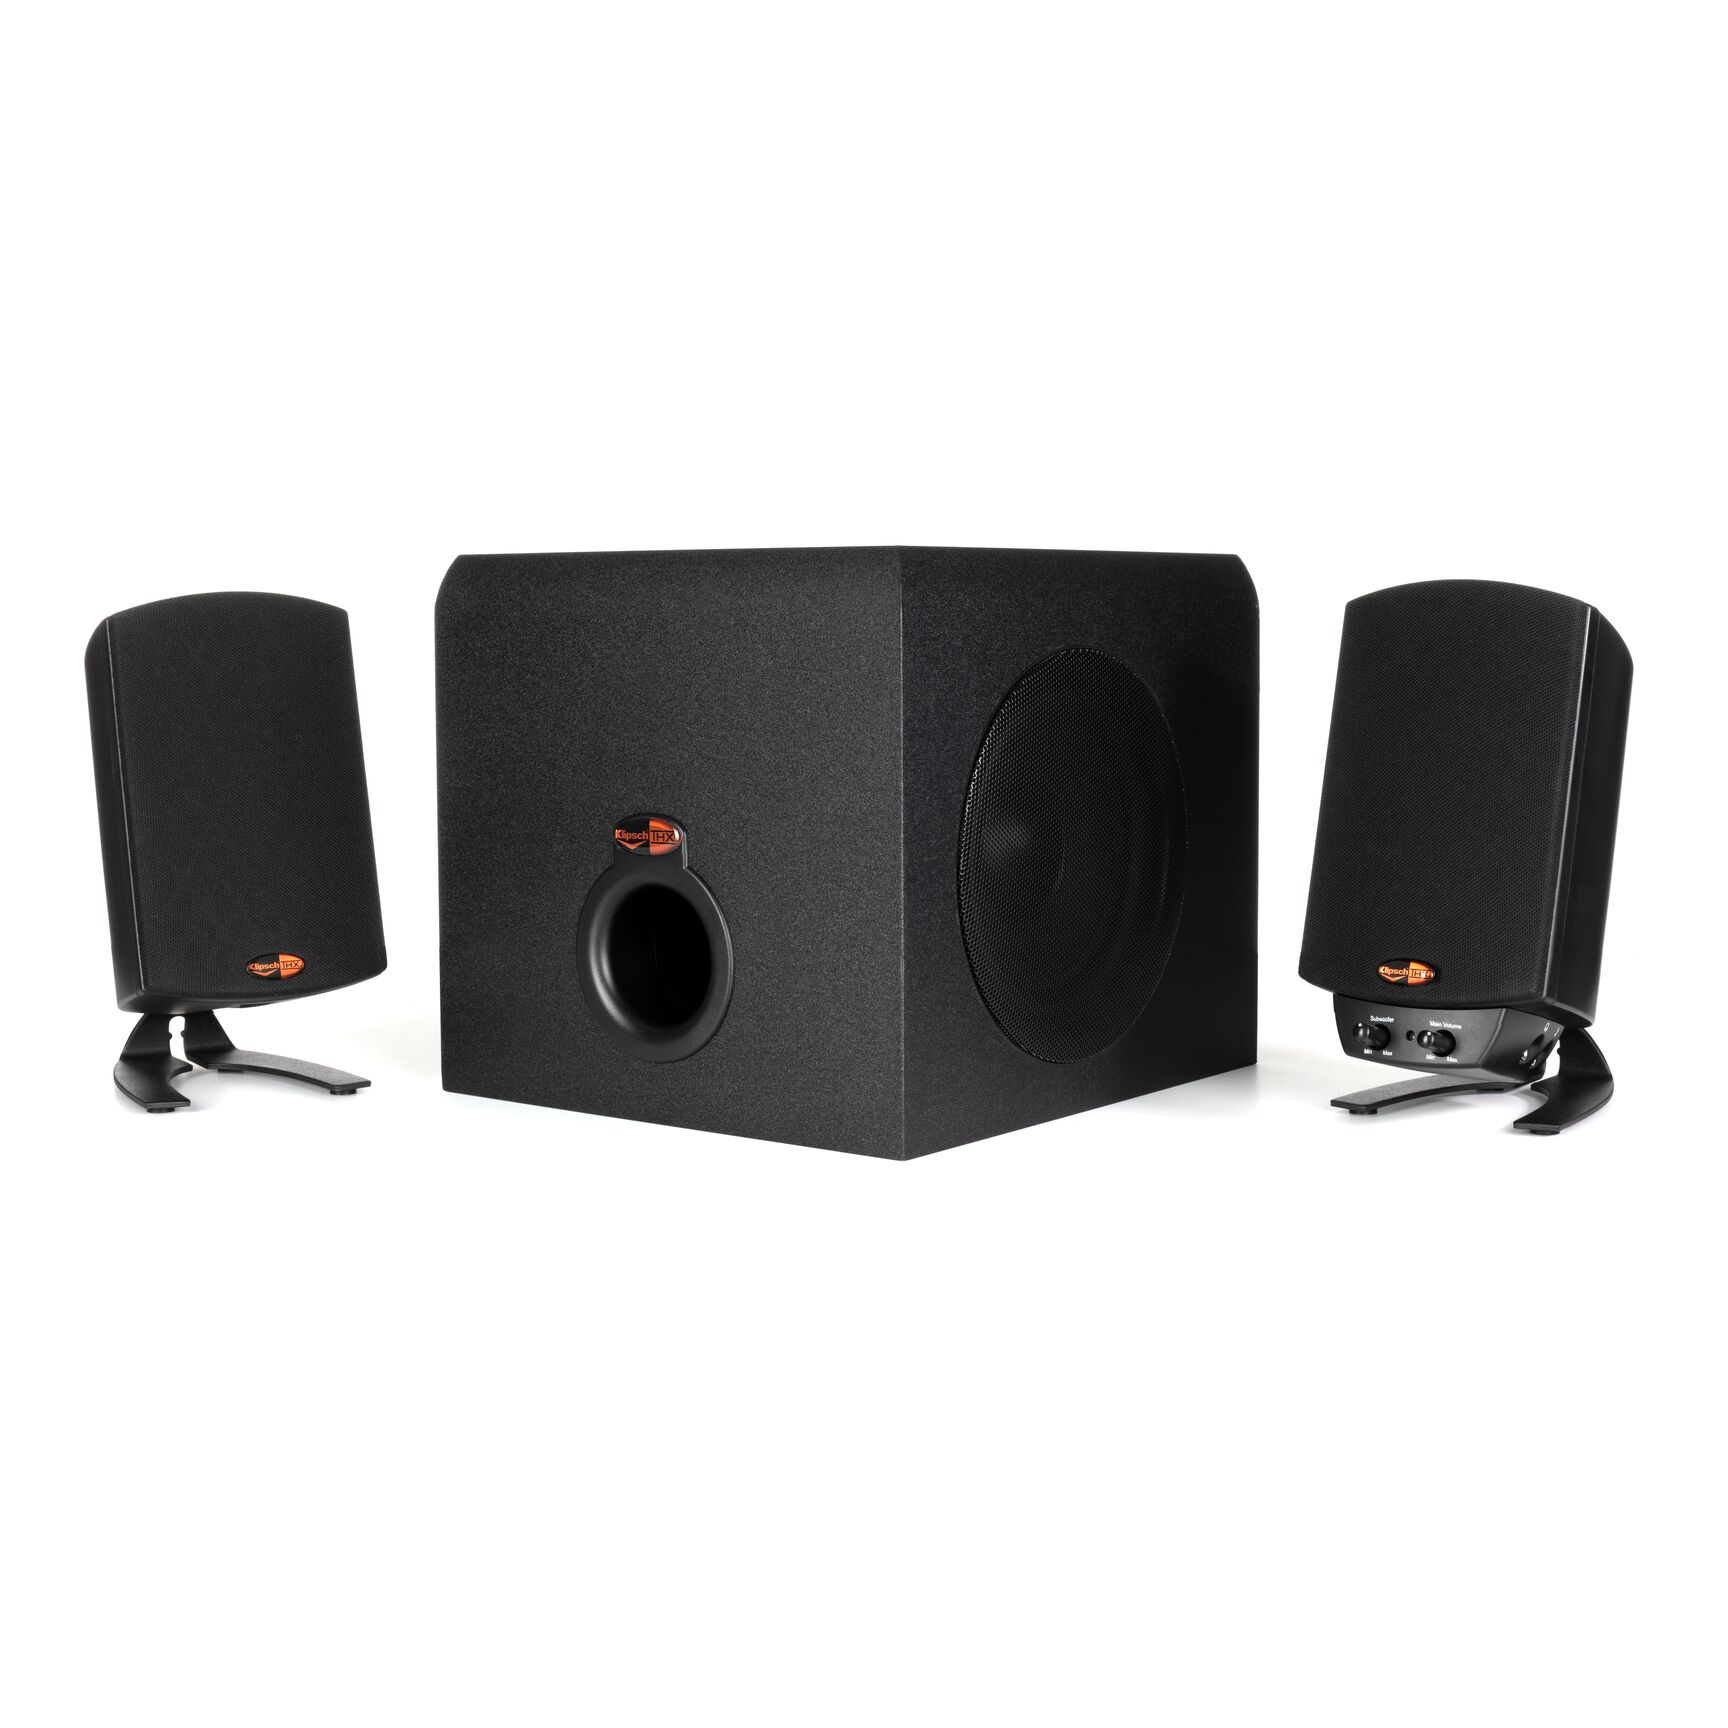 Klipsch Pro Media 2.1 THX Computer Speakers Two-Way Satellites 3" Midbass Drivers and 6.5" Subwoofer - image 1 of 8